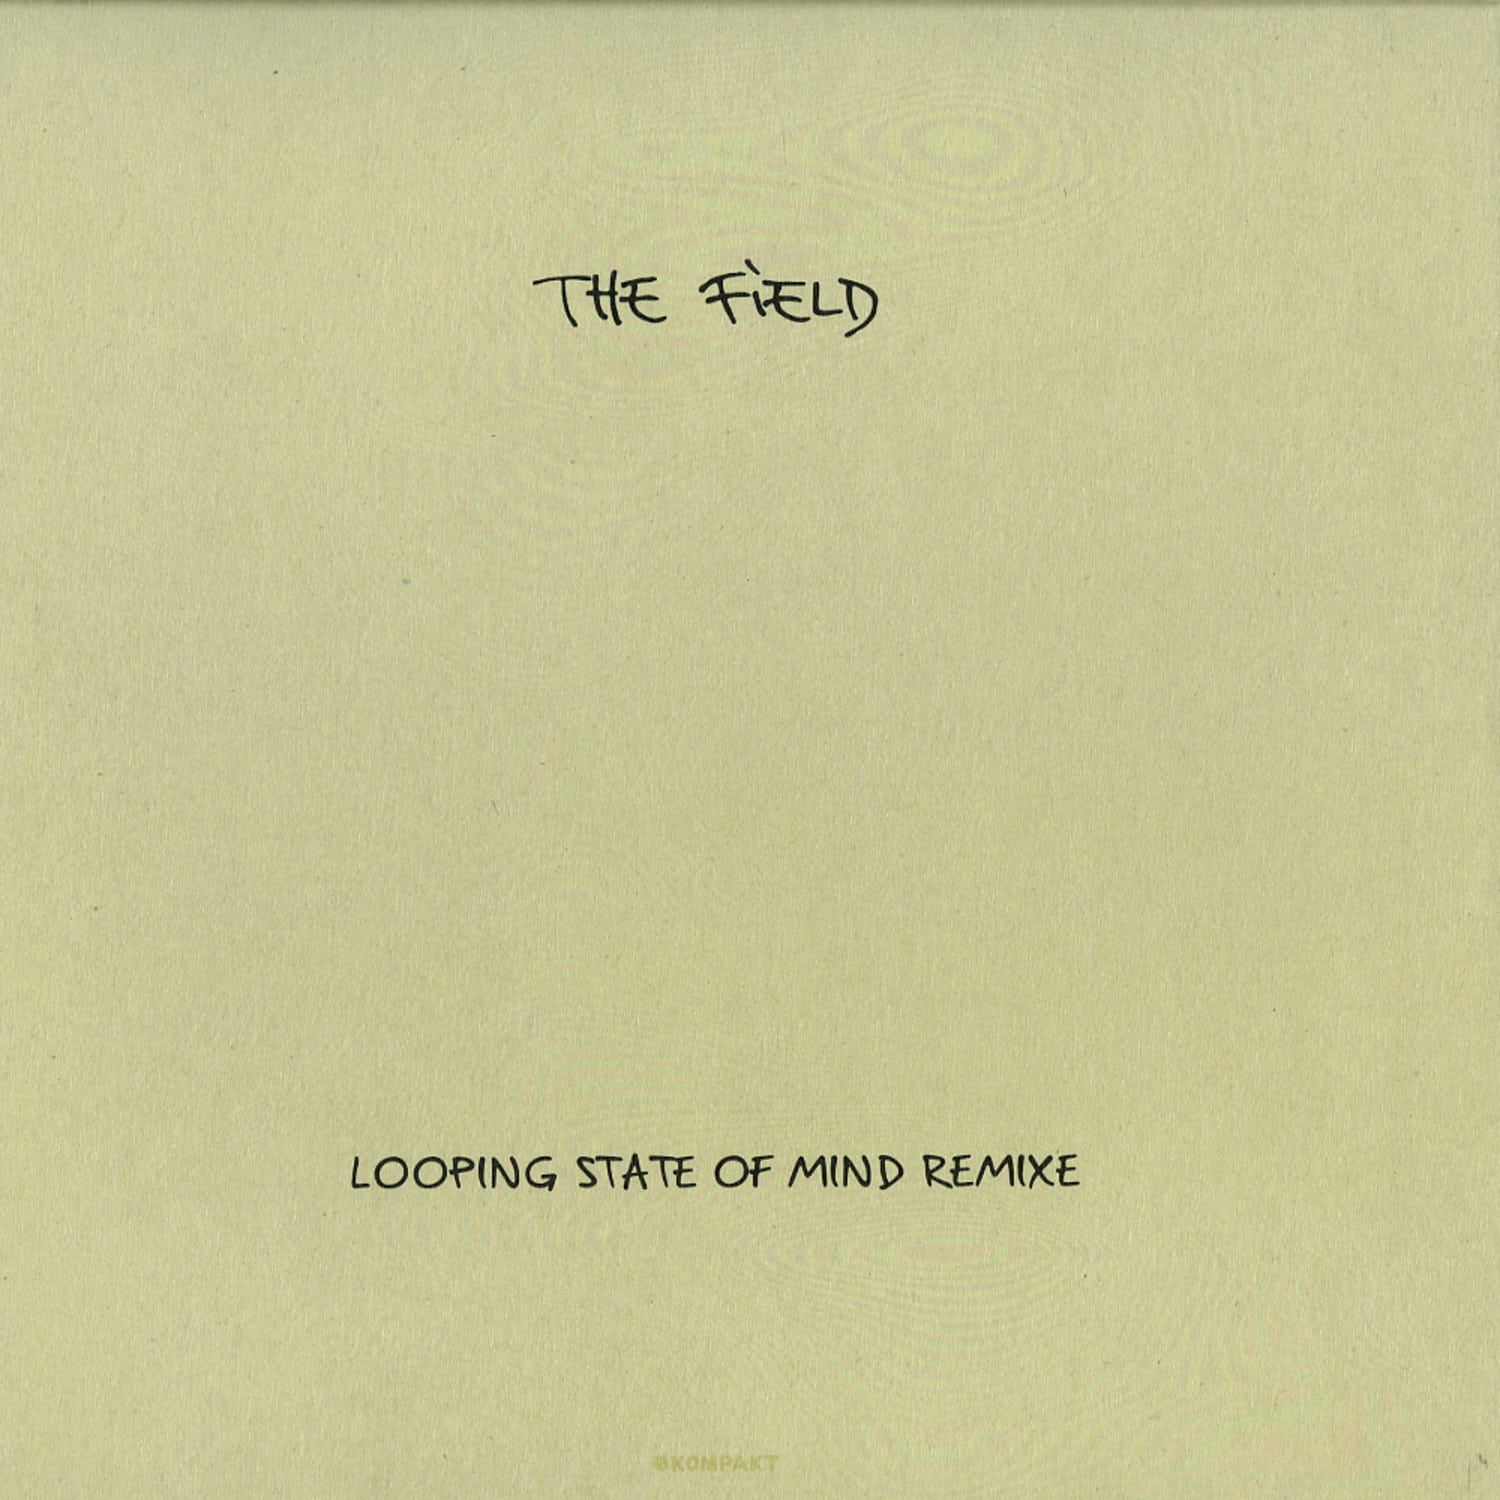 The Field - LOOPING STATE OF MIND REMIXE